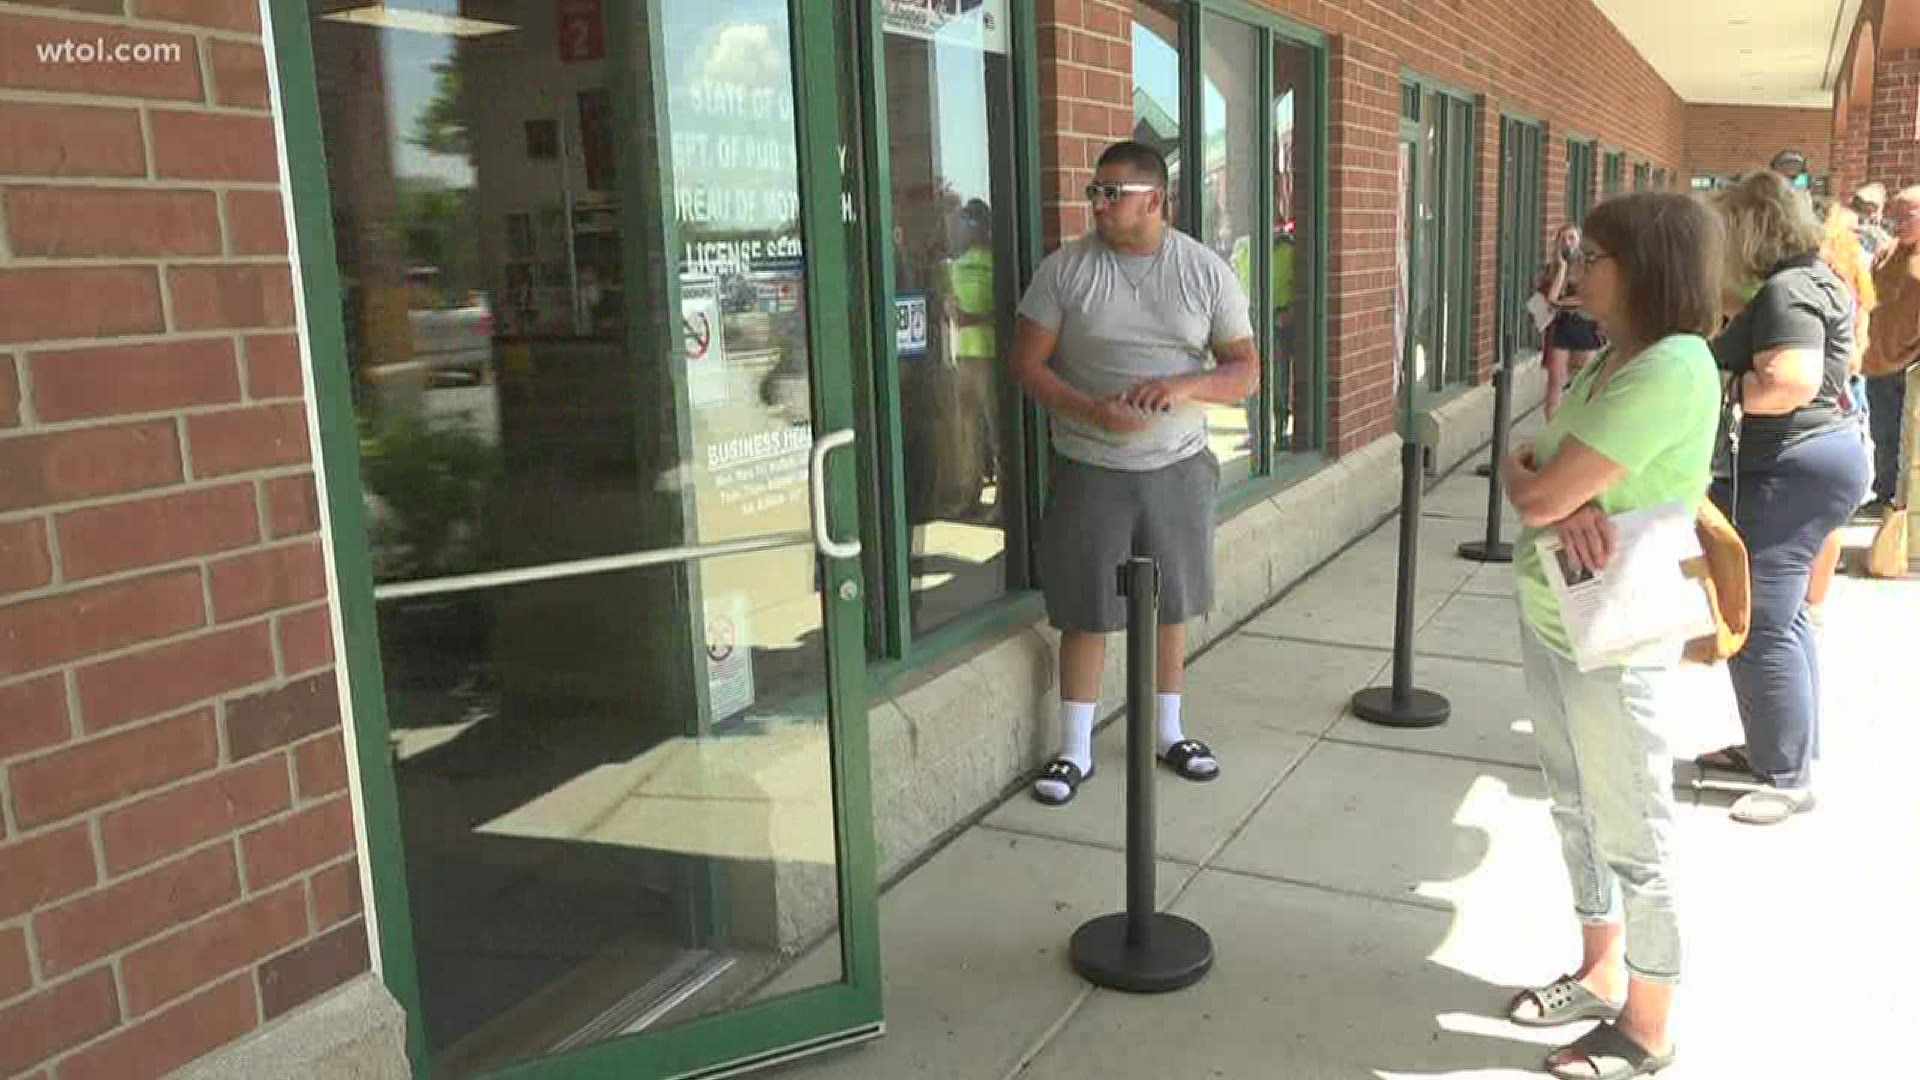 Though many activities could be completed entirely online, many waited in outdoor lines for BMV services Tuesday